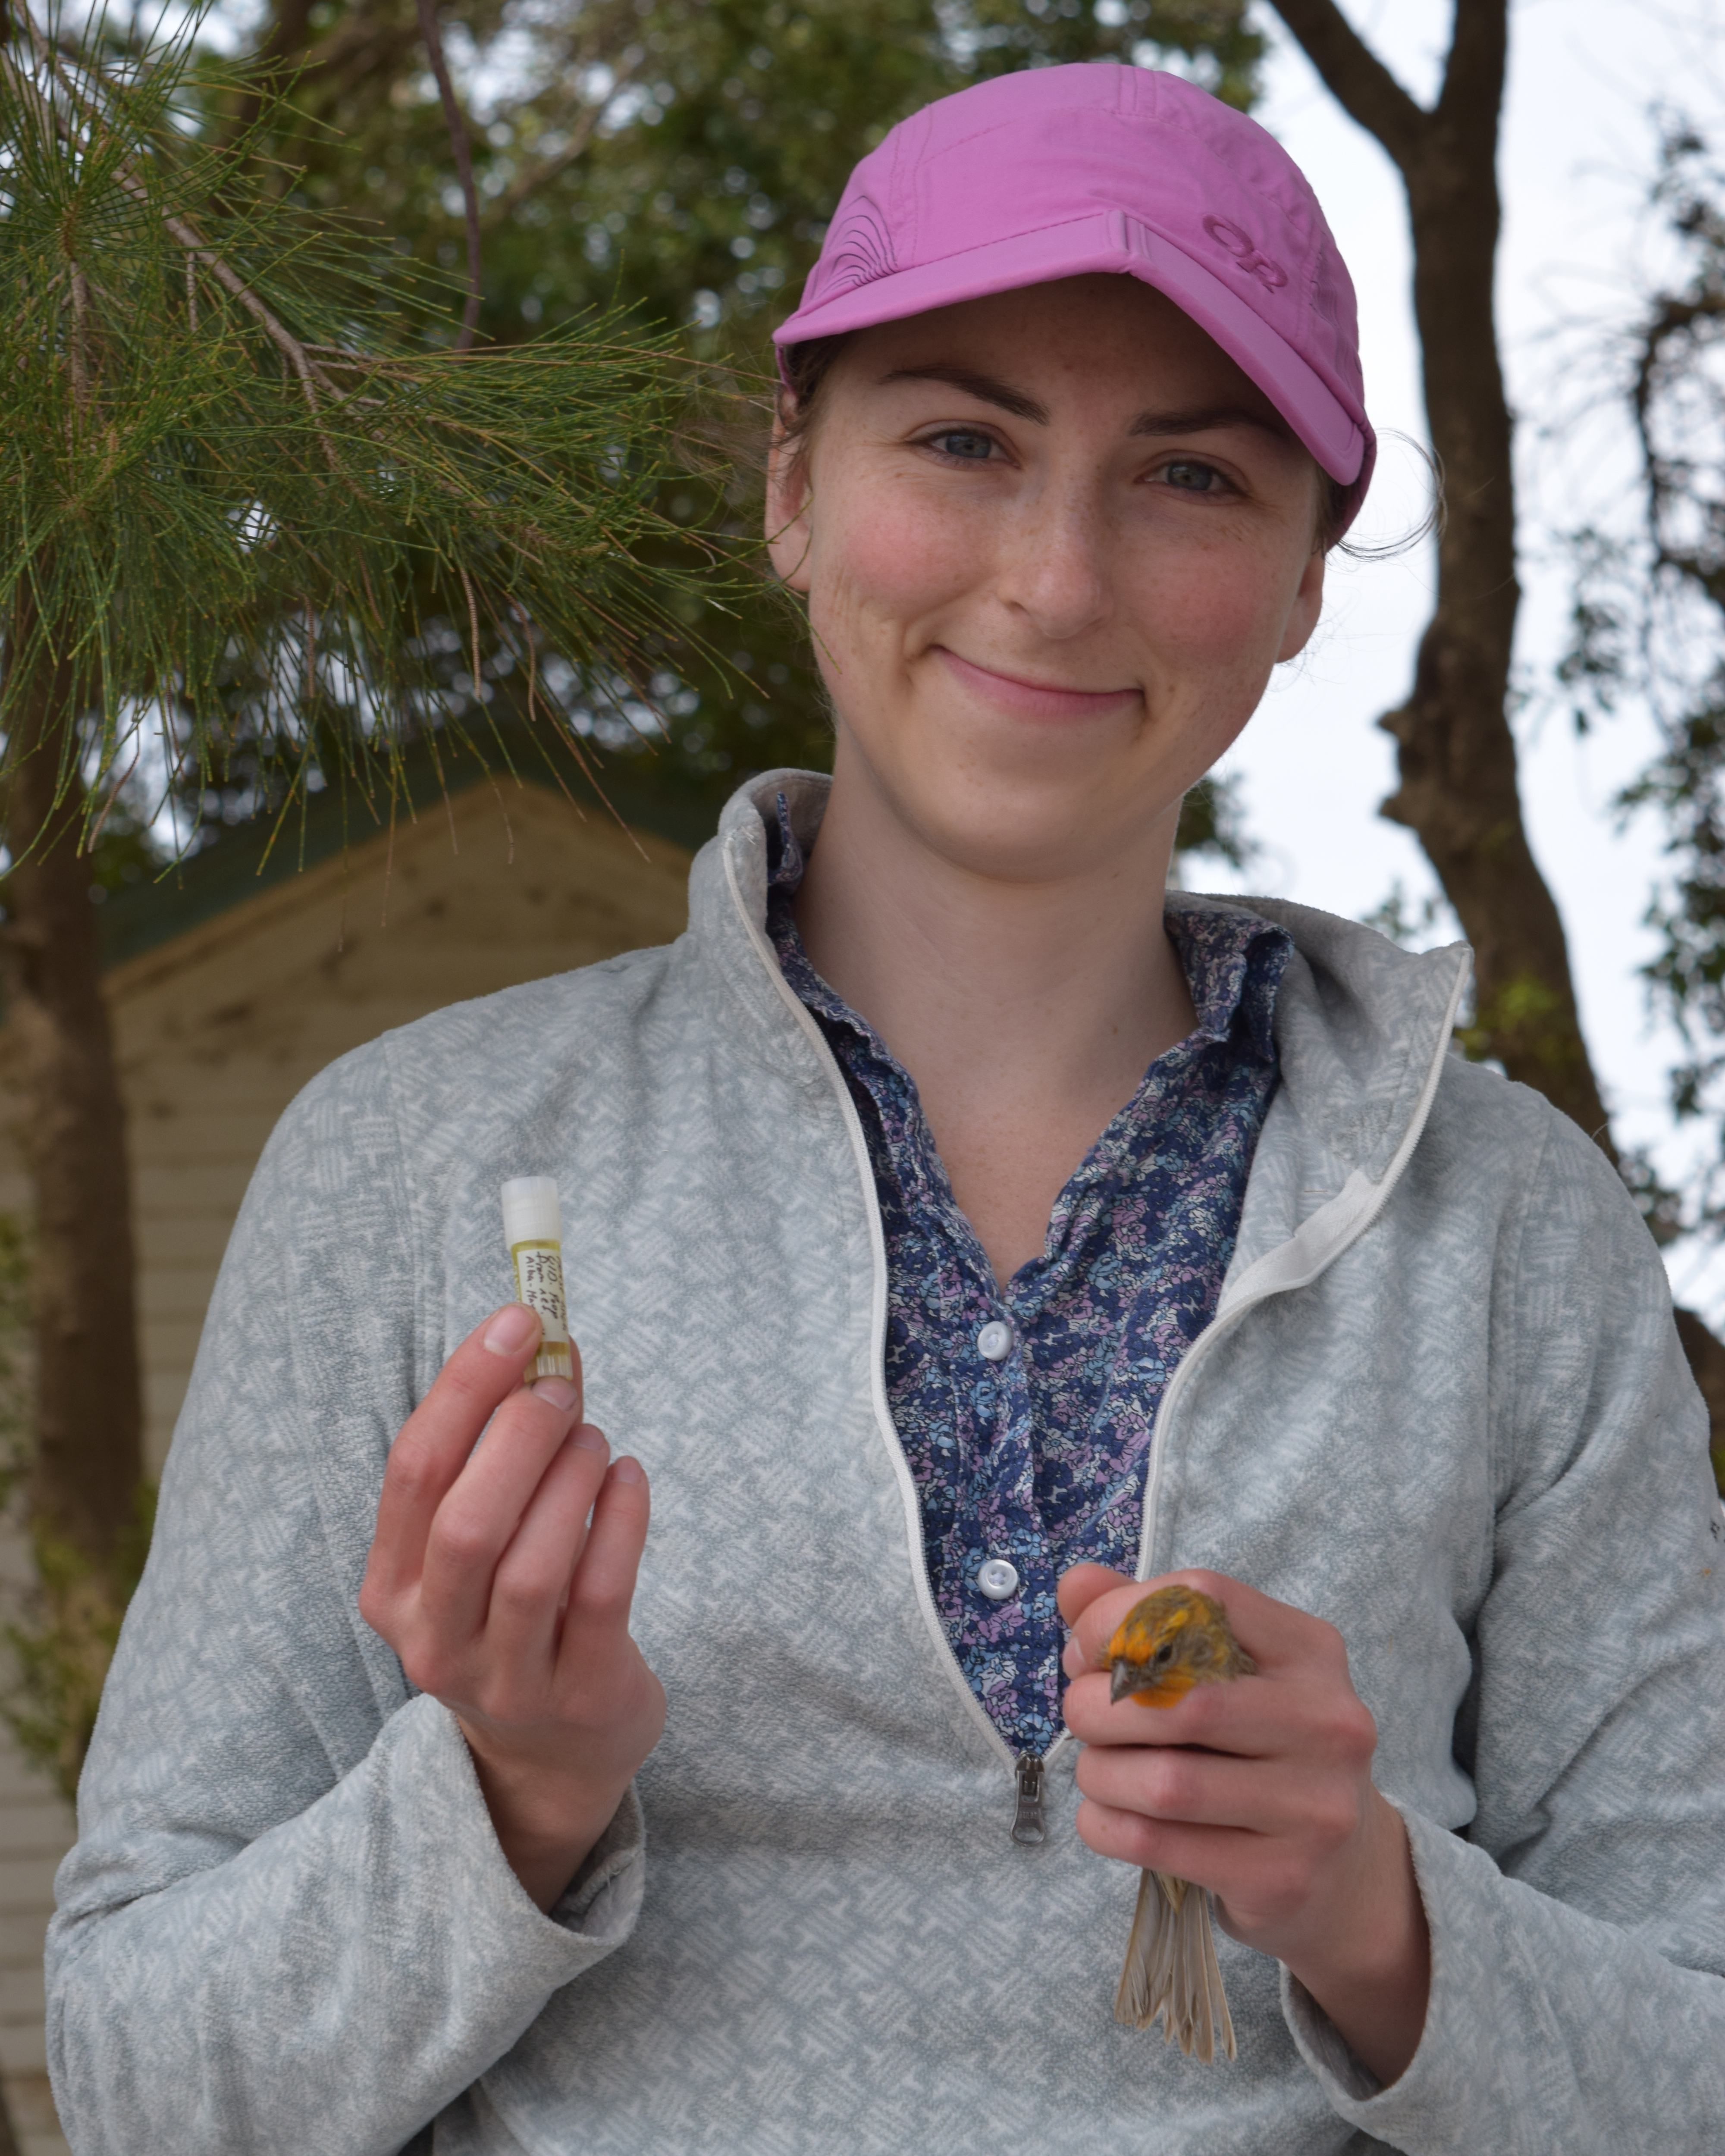 Smith posing with a bird and a research sample.